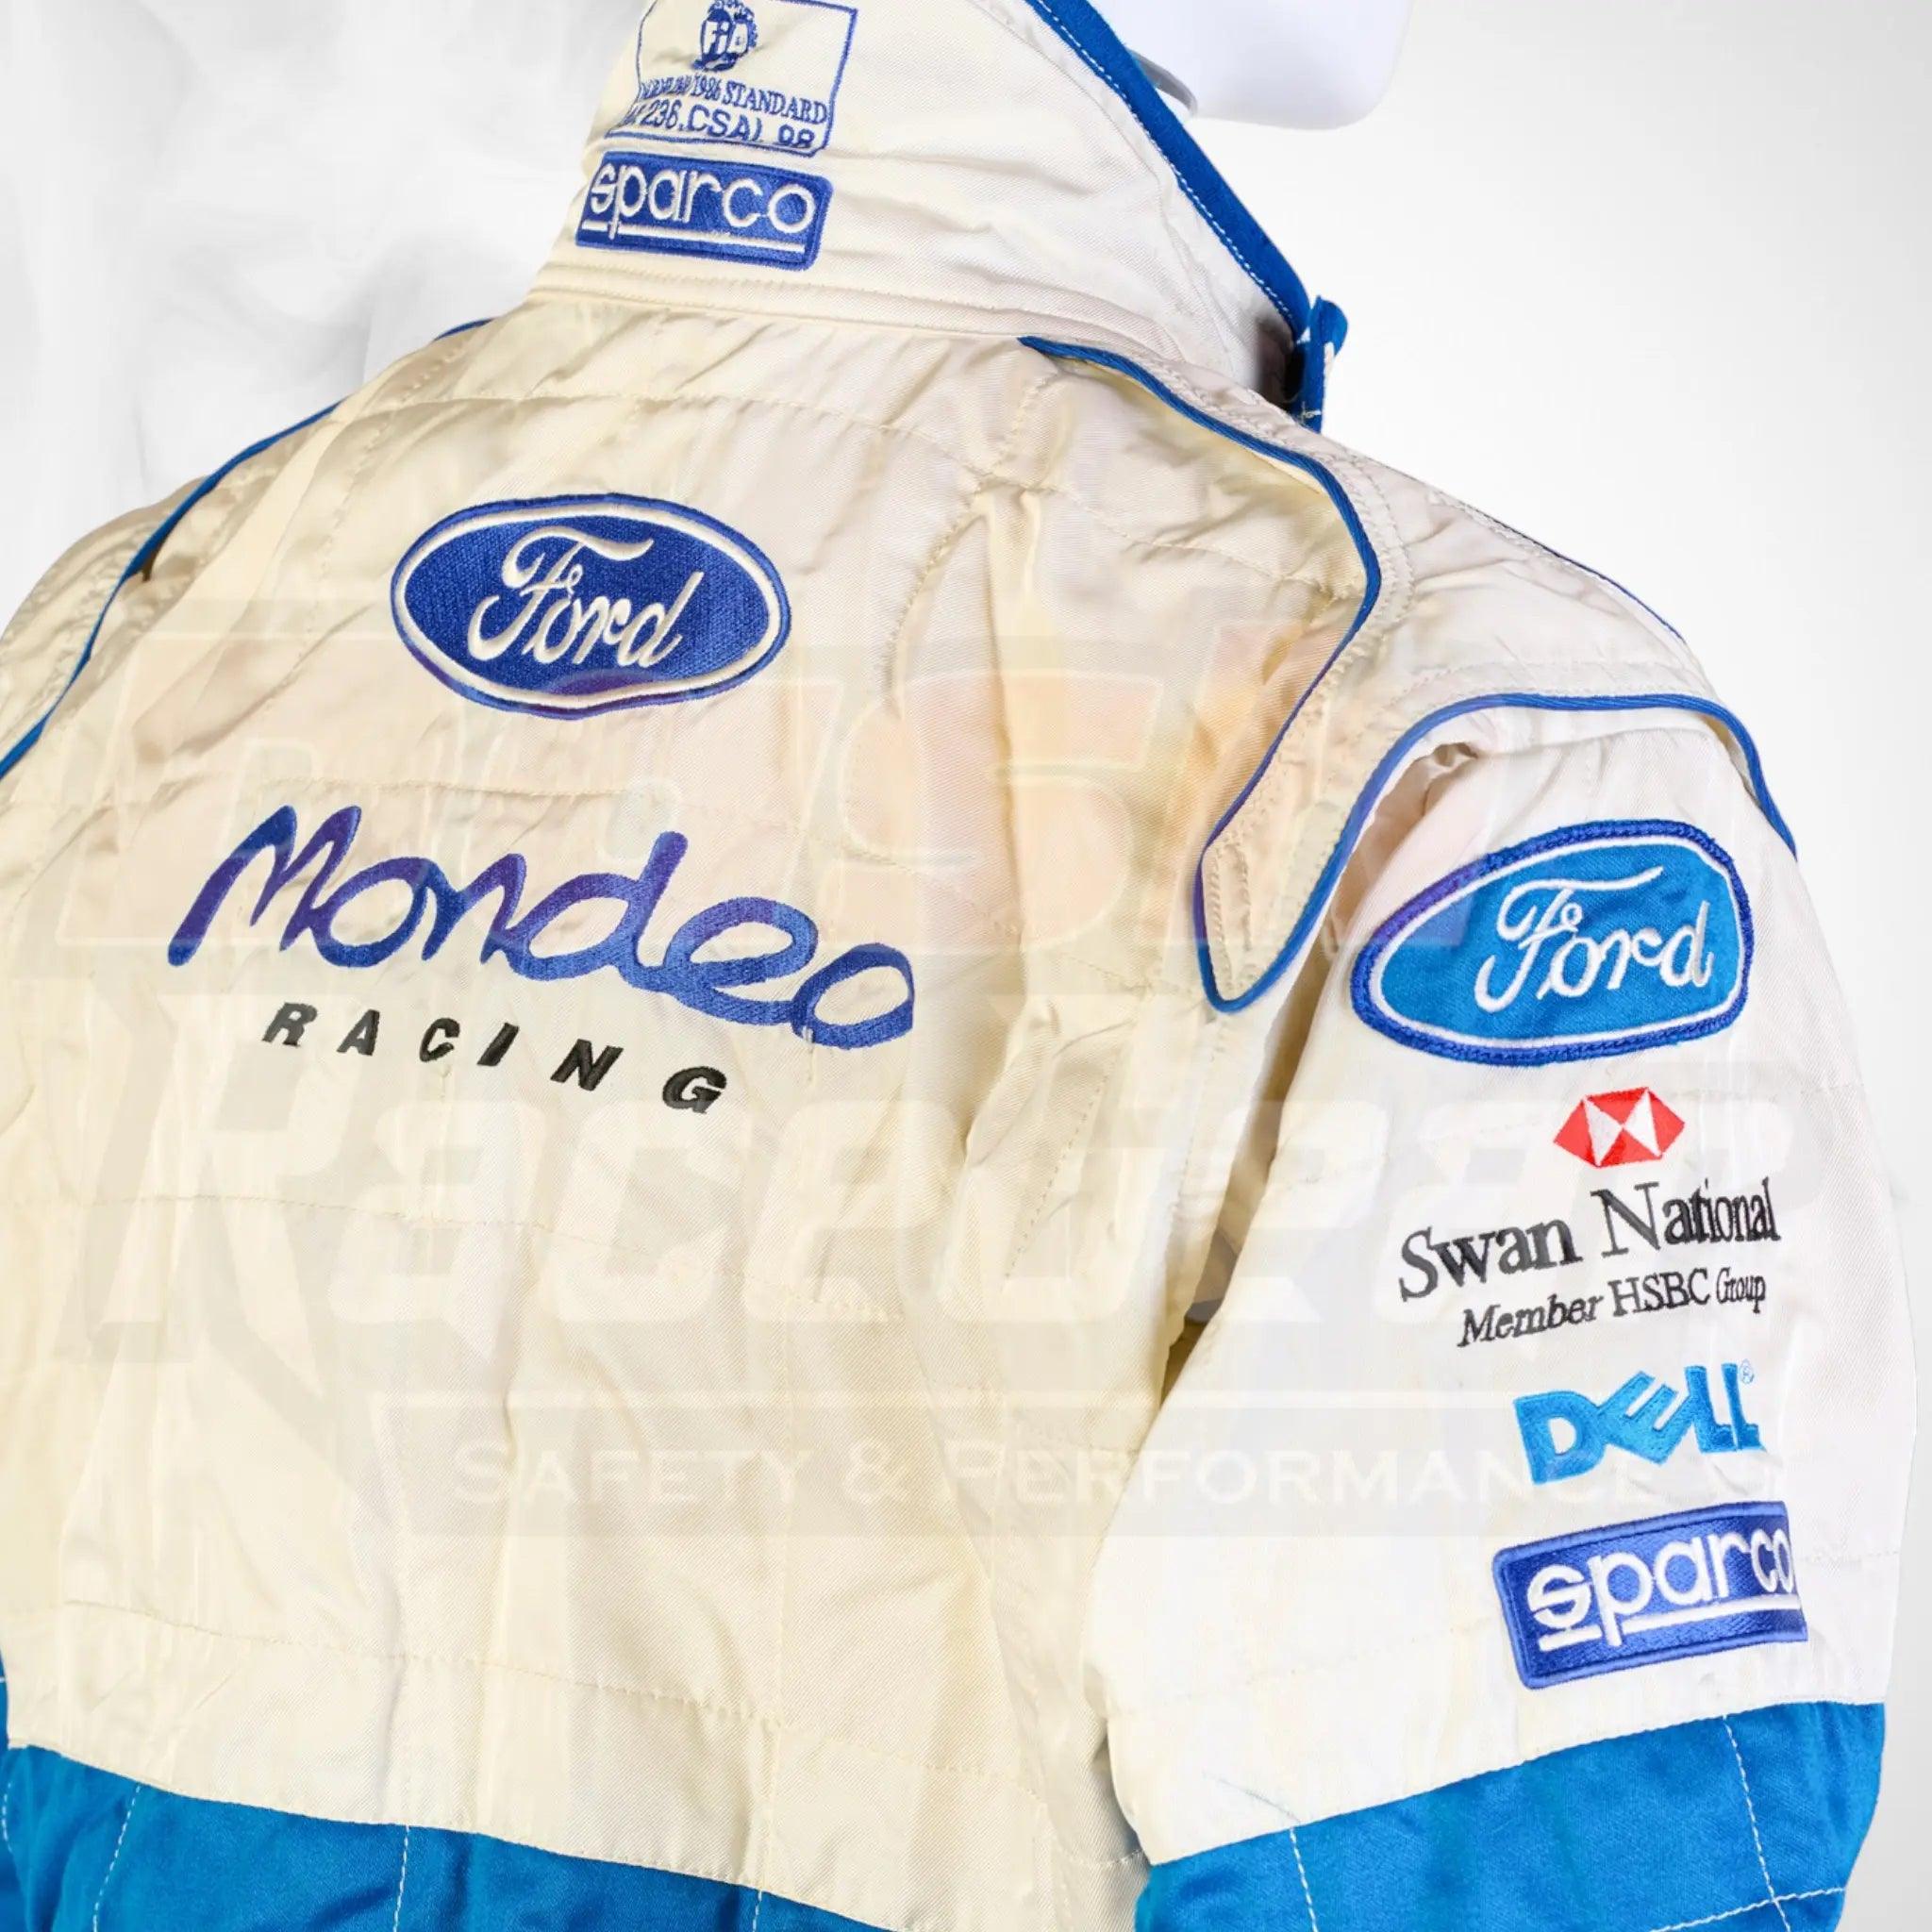 1998 Ford Mondeo Racing BTTC Sparco NIGEL MANSELL’S Race Suit - Dash Racegear 